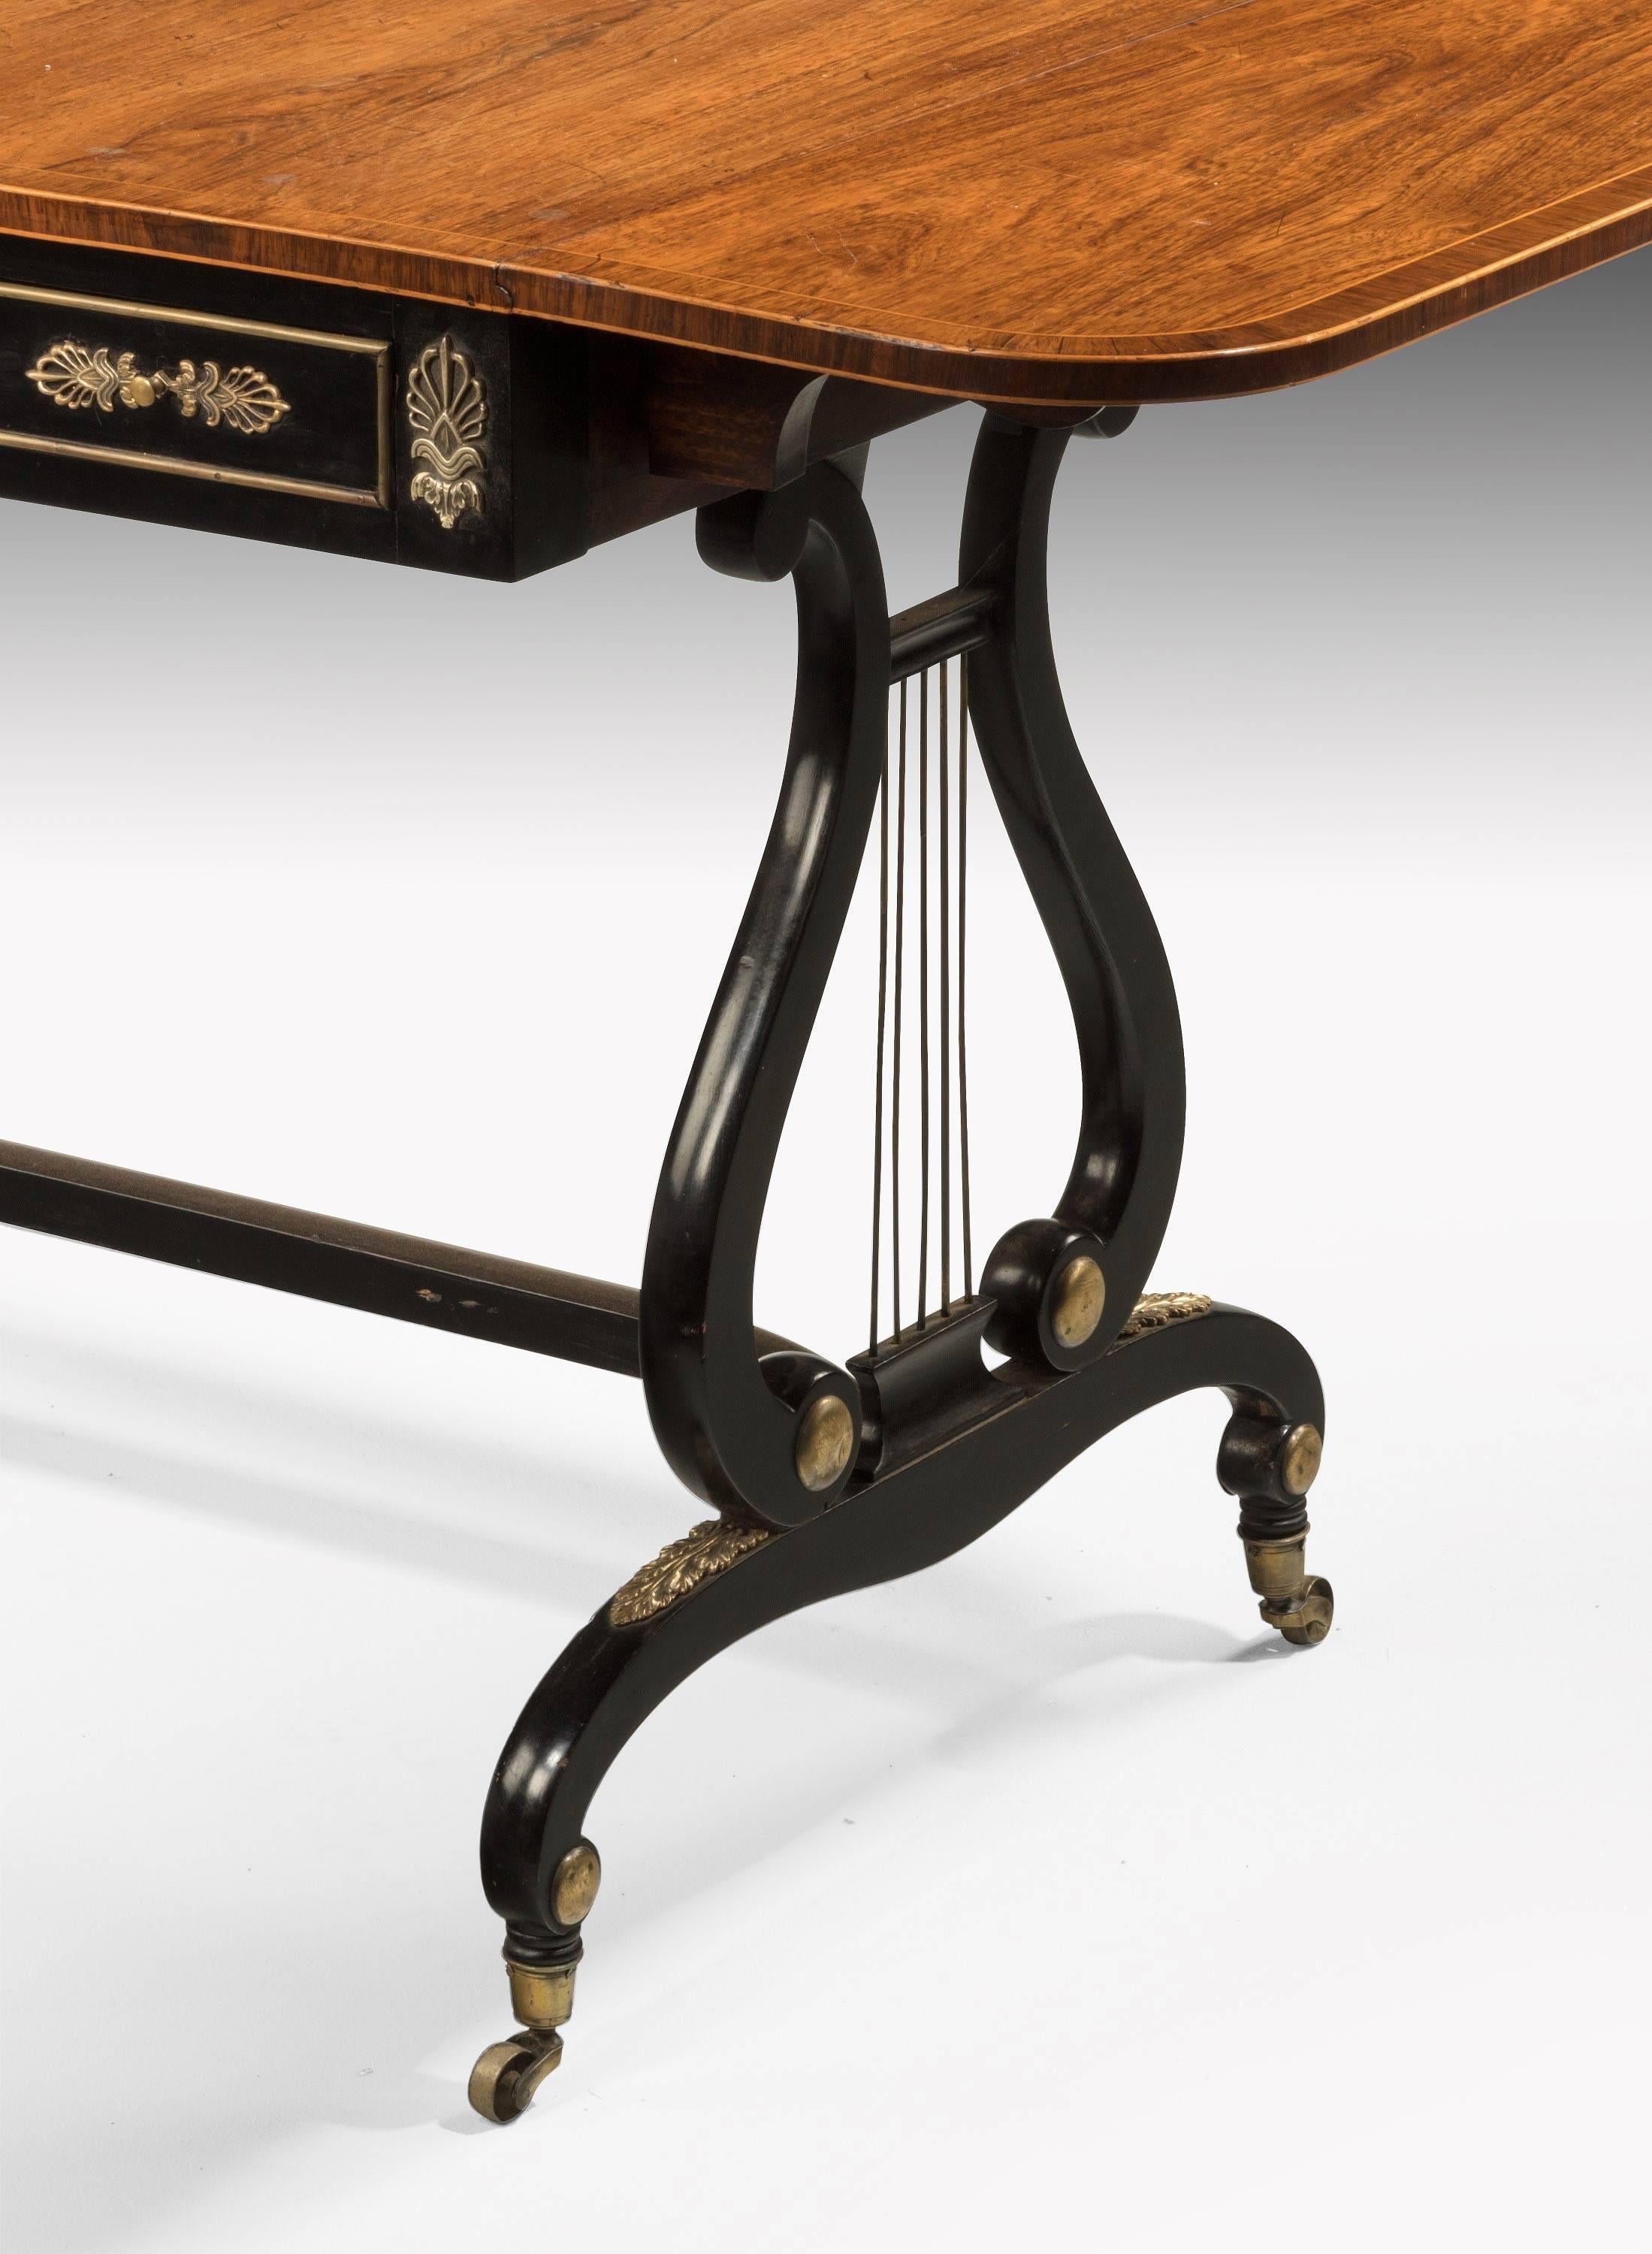 19th Century Regency Period Rosewood Sofa Table of the Most Elegant Form